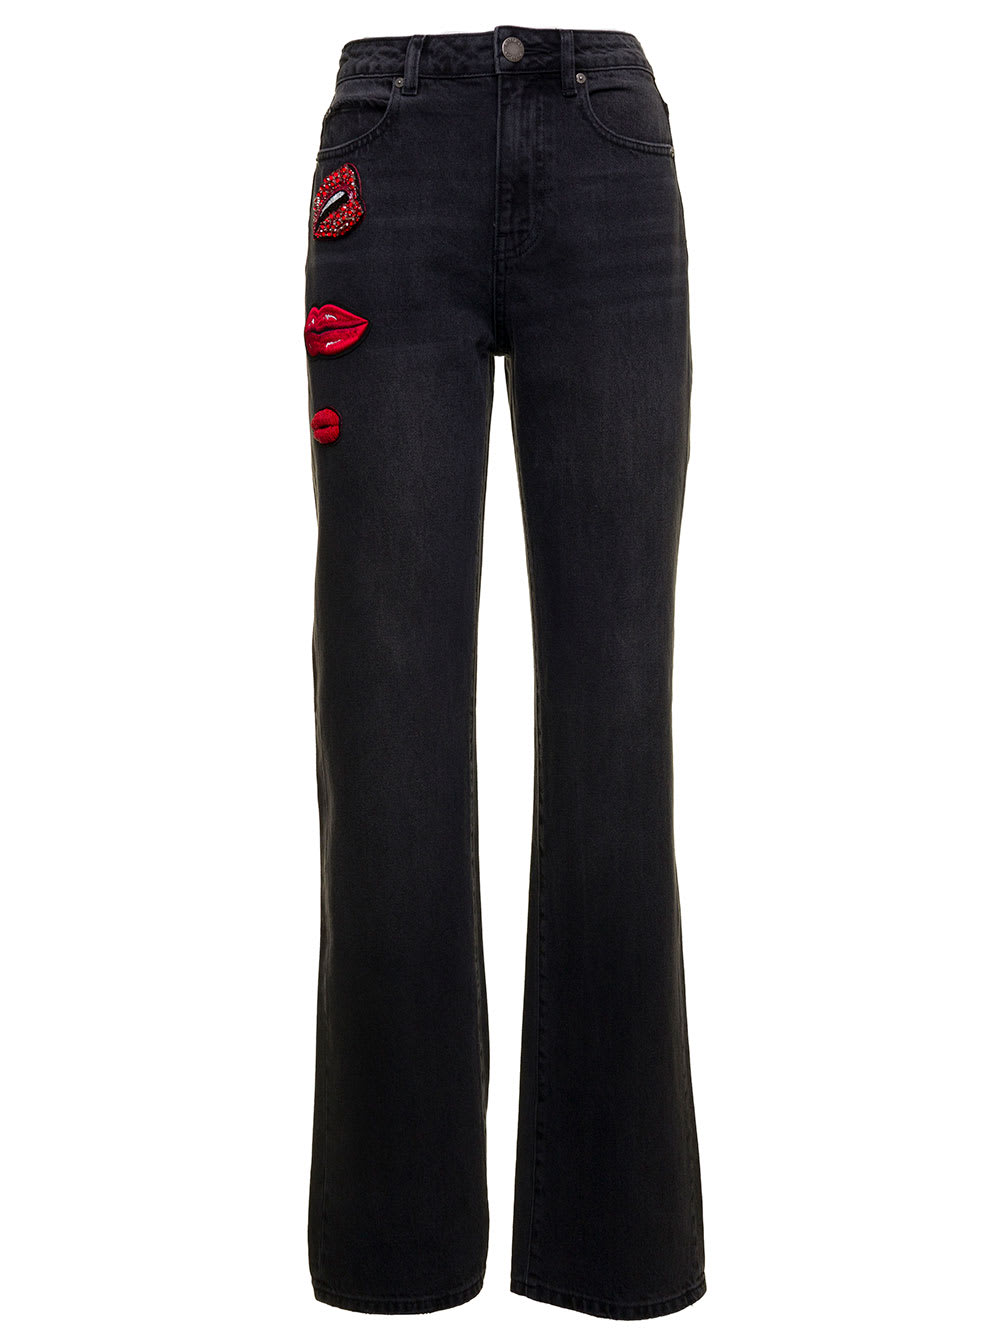 Pinko Womans Flavia Black Denim Jeans With Patch Lips